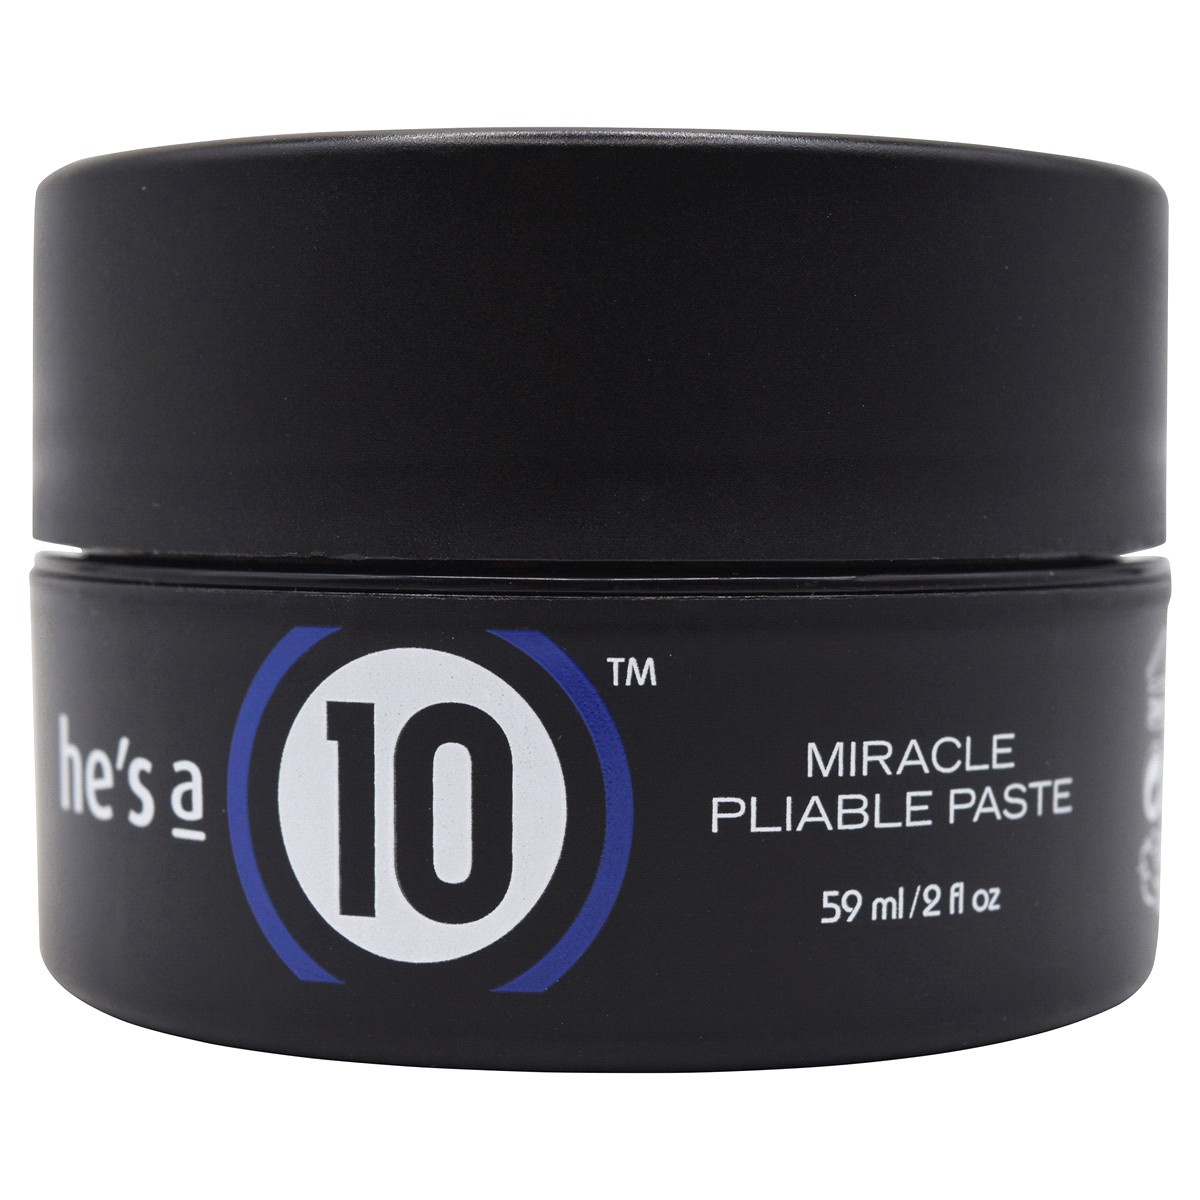 slide 1 of 1, He's a 10 Miracle Pliable Paste, 2 oz